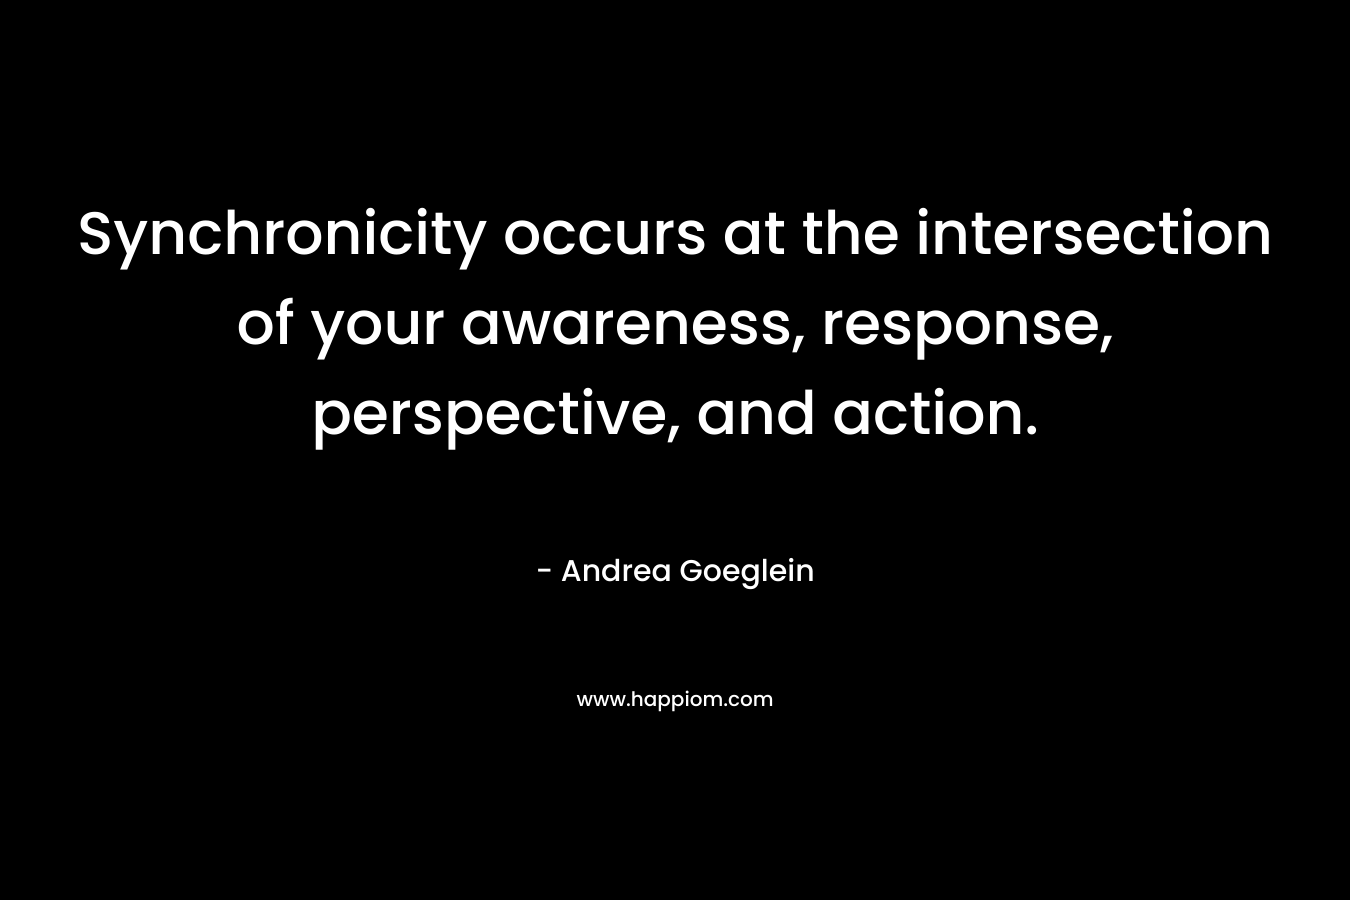 Synchronicity occurs at the intersection of your awareness, response, perspective, and action. – Andrea Goeglein